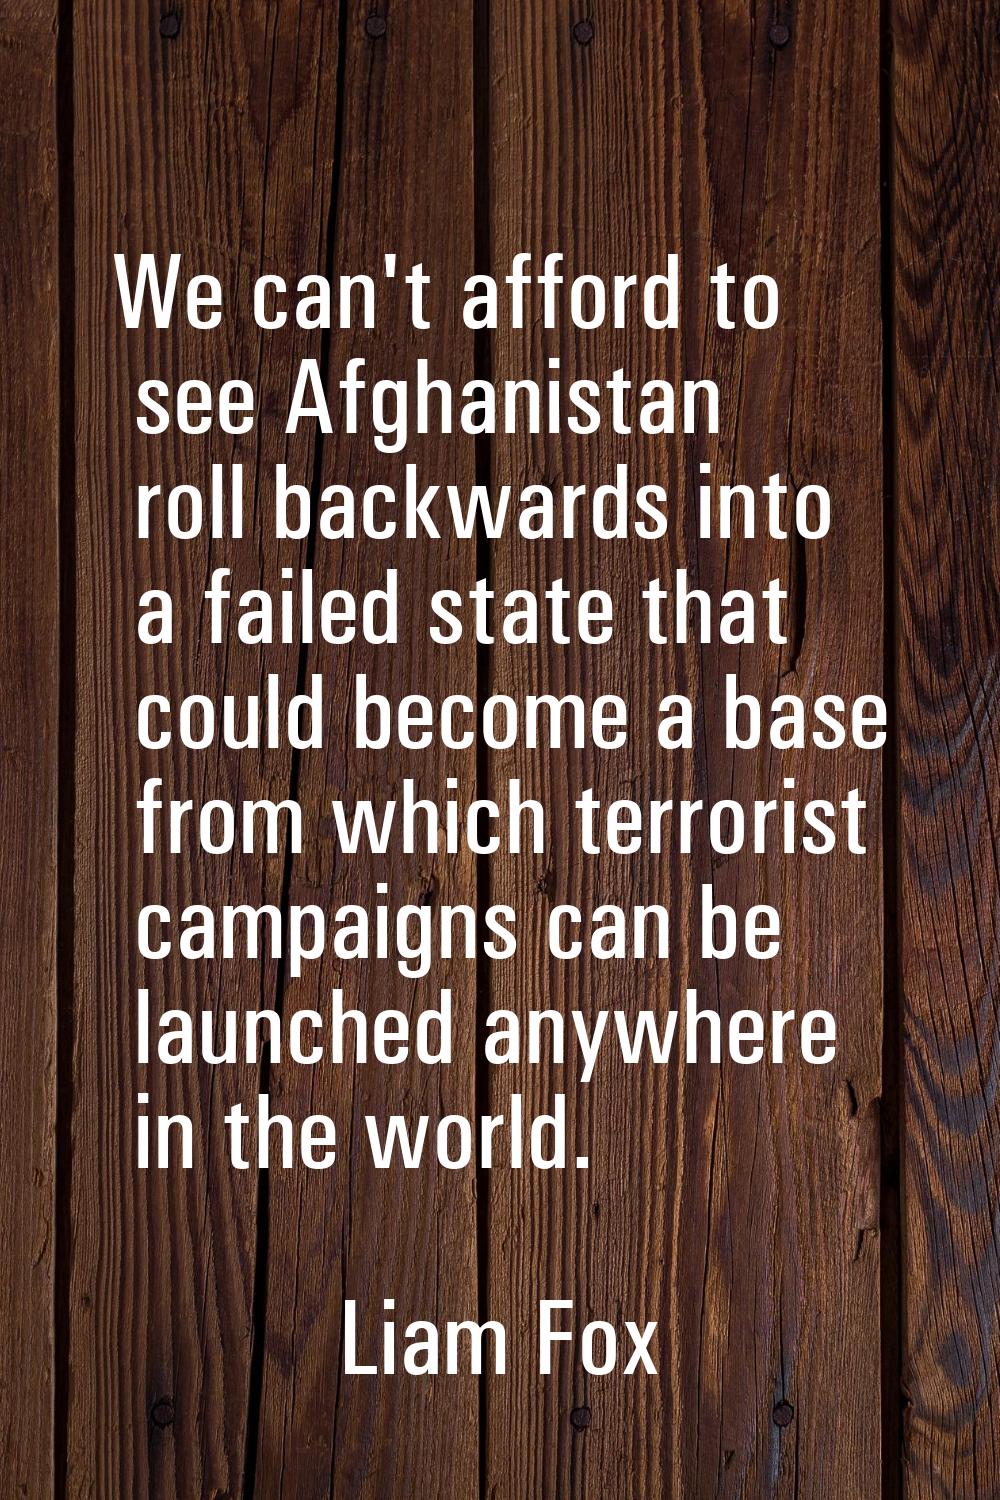 We can't afford to see Afghanistan roll backwards into a failed state that could become a base from